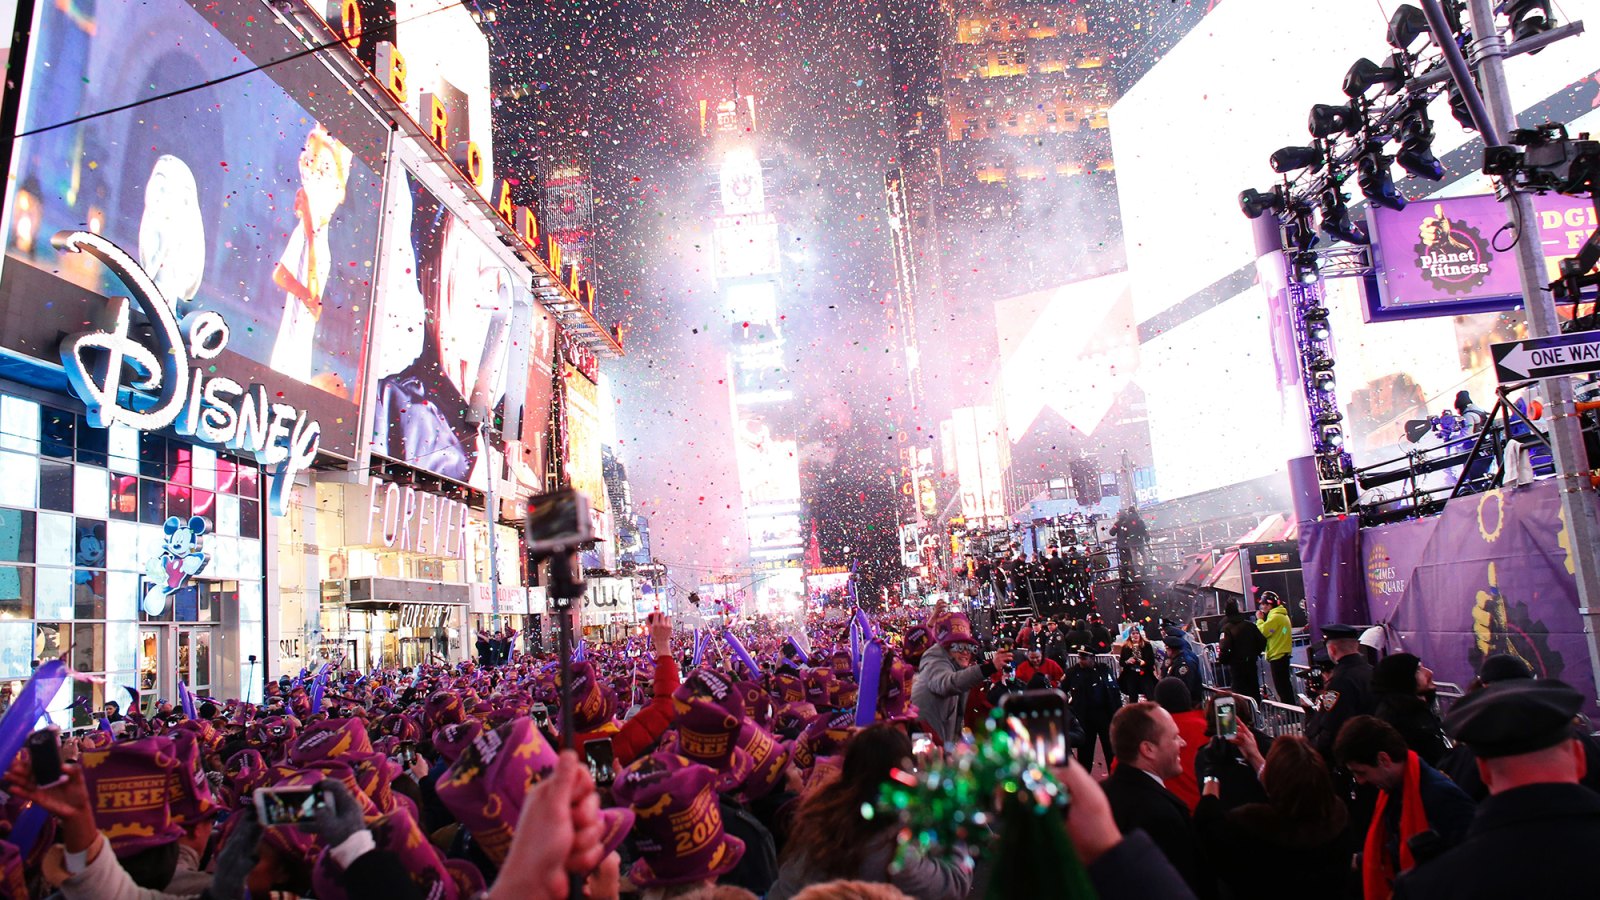 Revelers celebrate after the ball drop during New Year's Eve celebrations in Times Square